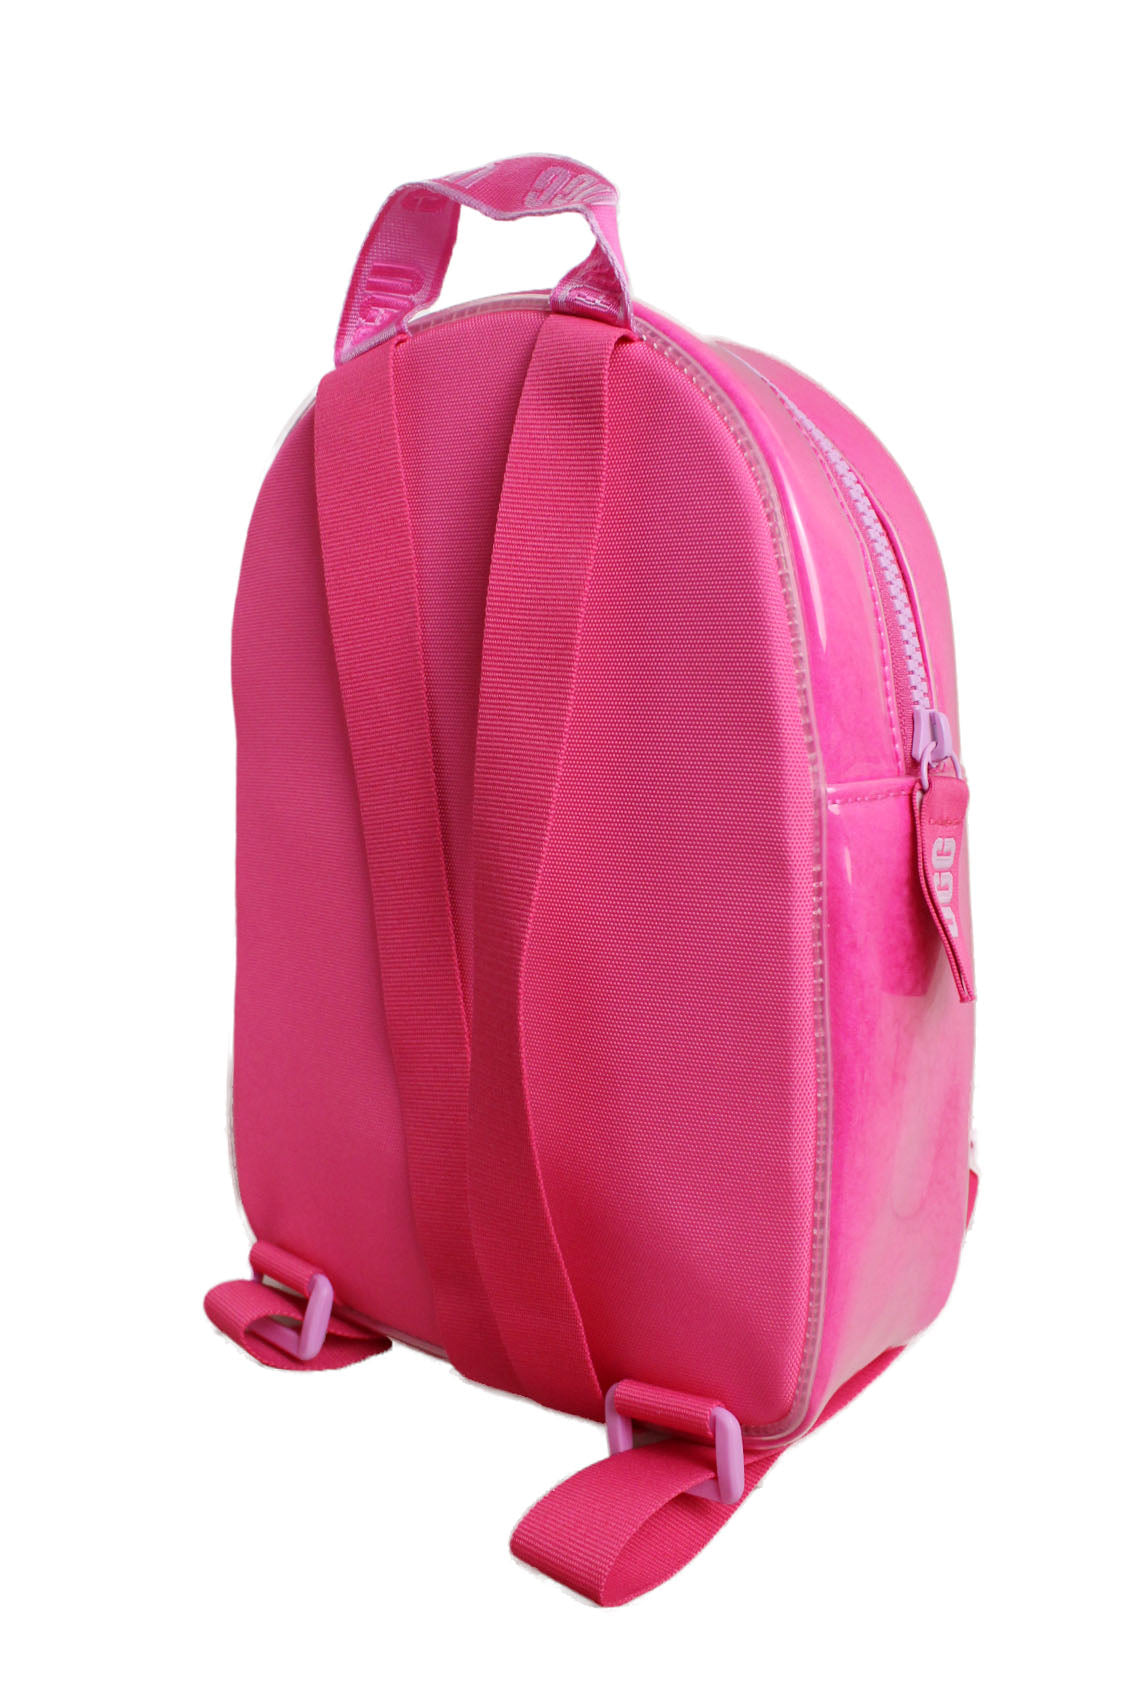 ¾ back profile of hot pink backpack sitting upright highlighting the nylon panel back and webbing straps. 